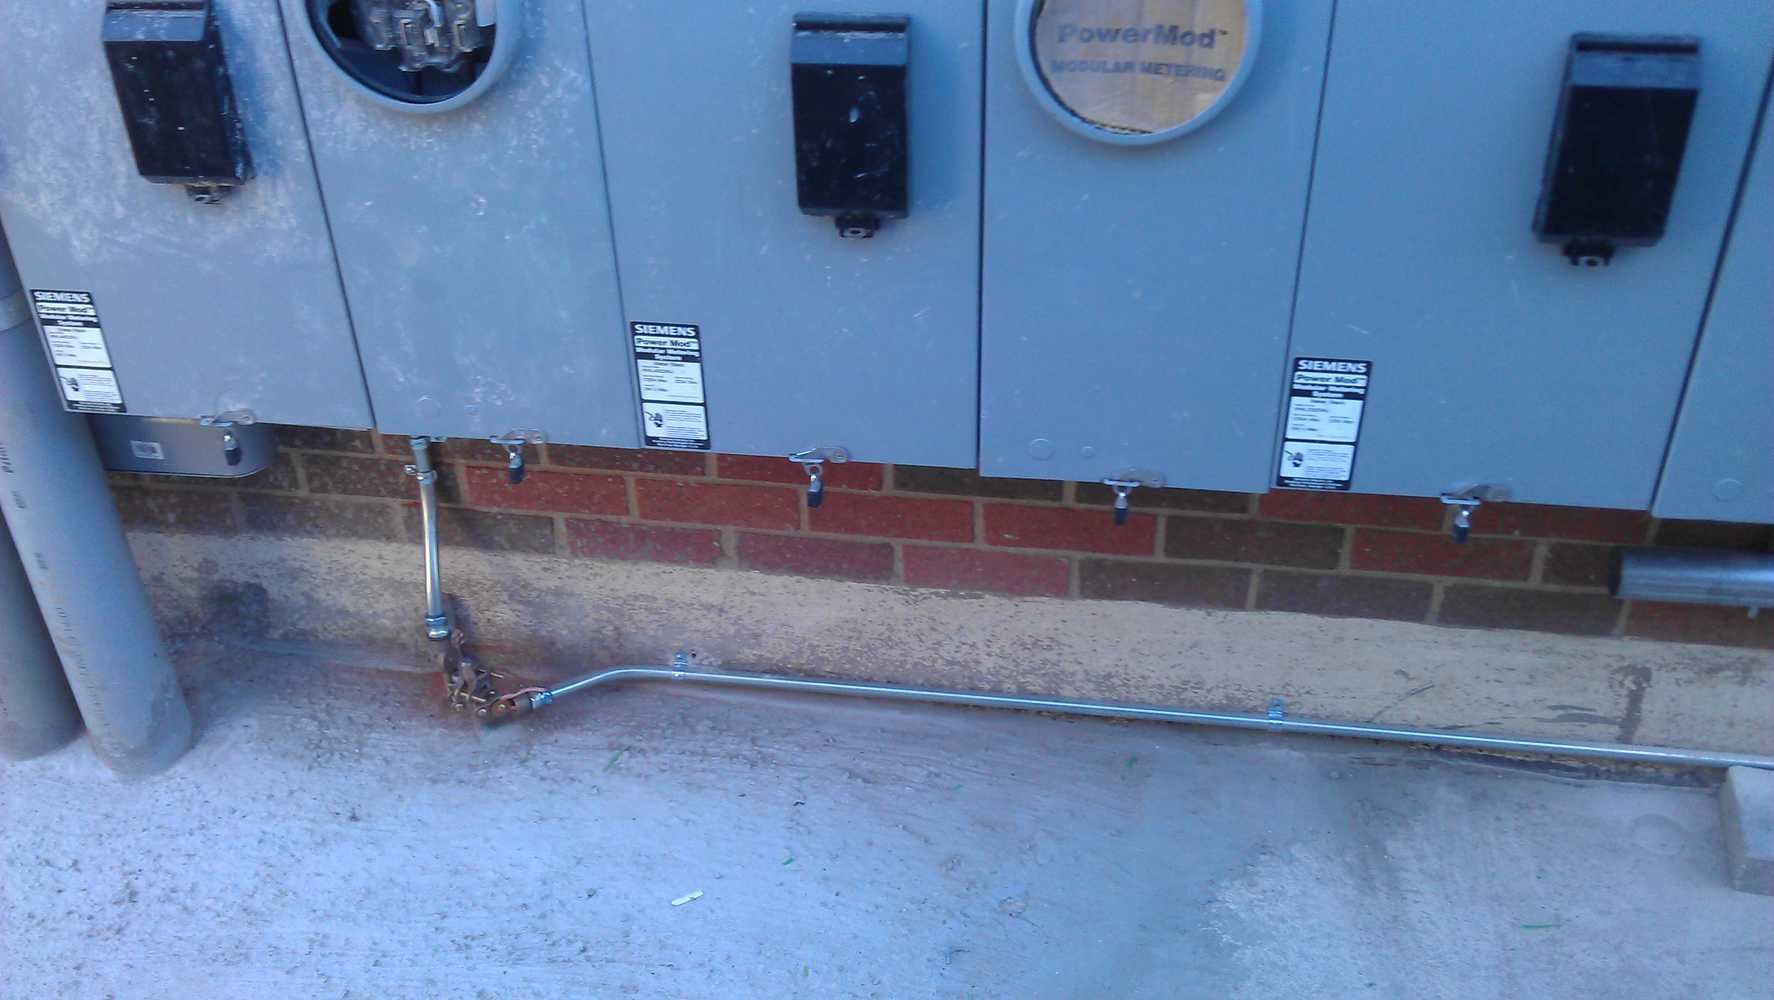 Photo(s) from 7 Star Electric, Plumbing, Heating, & Cooling